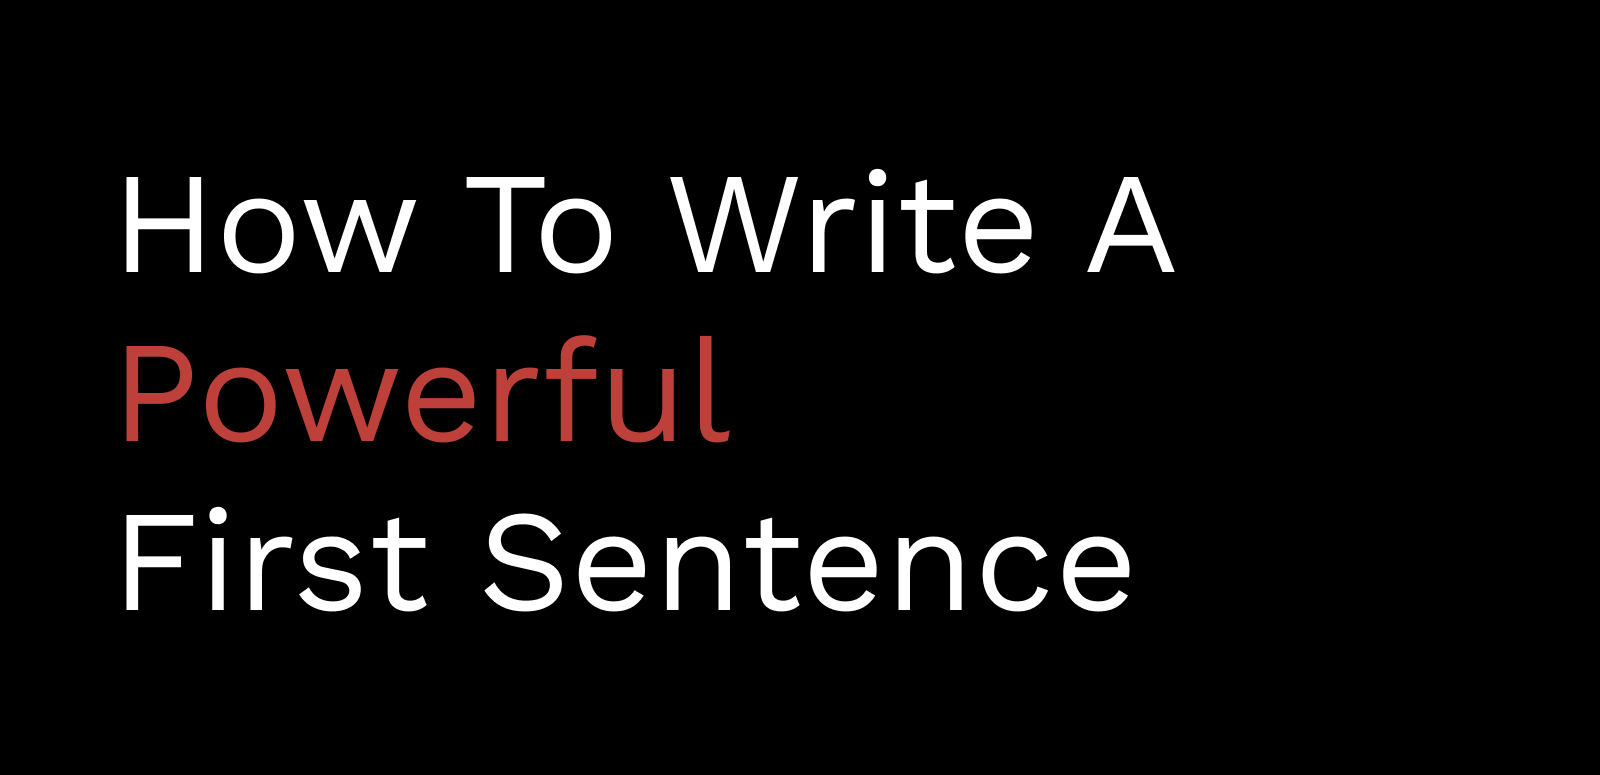 How To Write A Powerful First Sentence